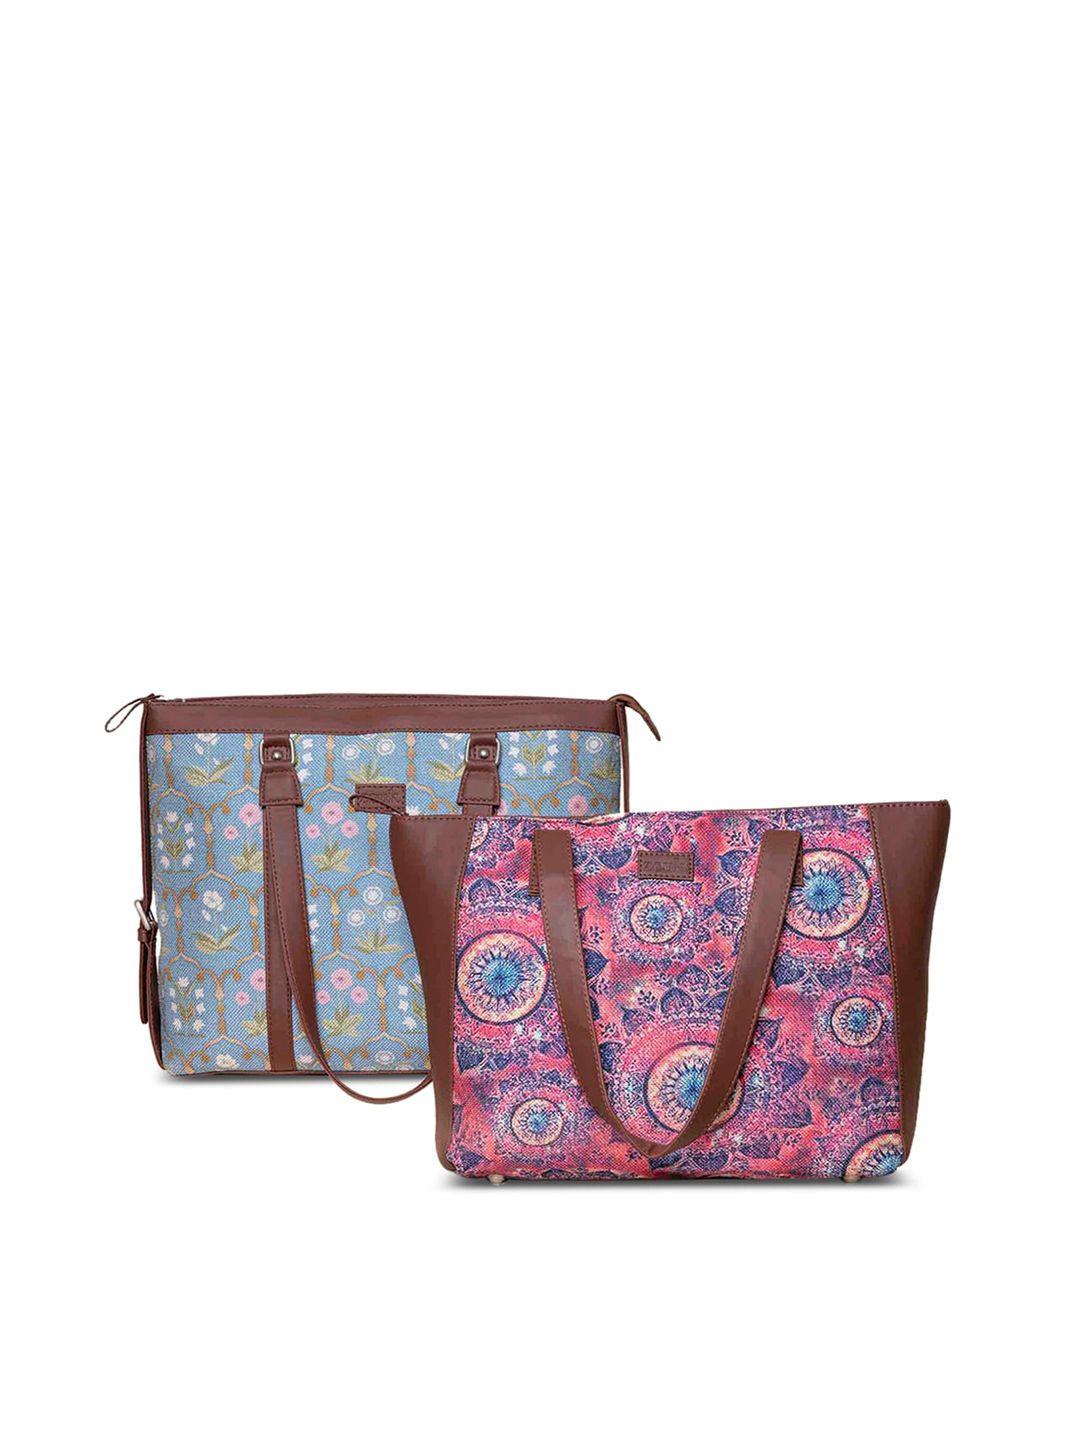 zouk multicoloured printed structured sling bag